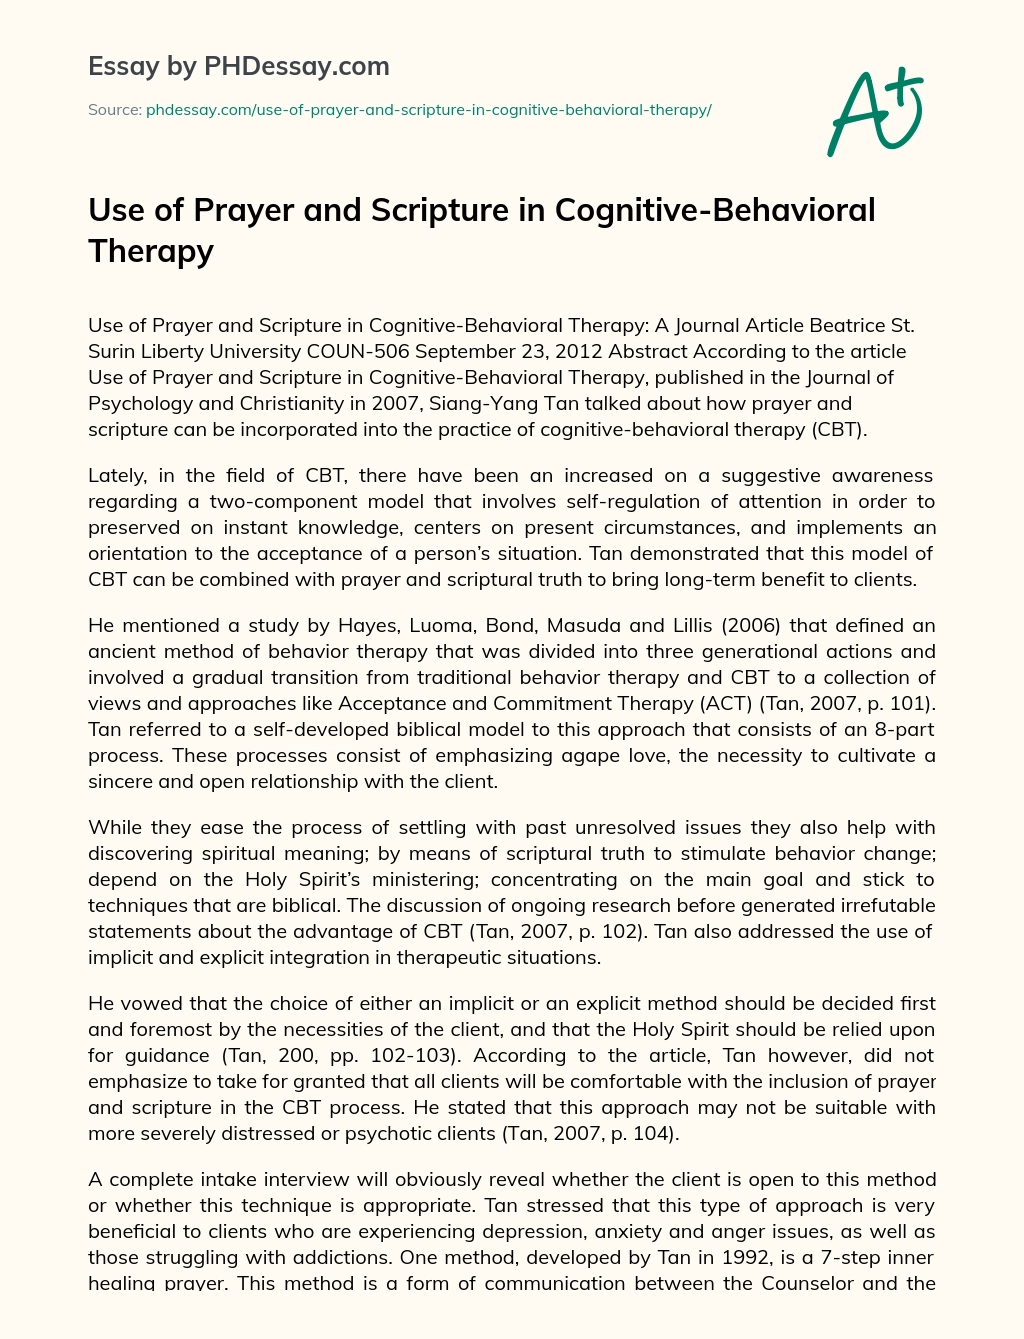 Use of Prayer and Scripture in Cognitive-Behavioral Therapy essay